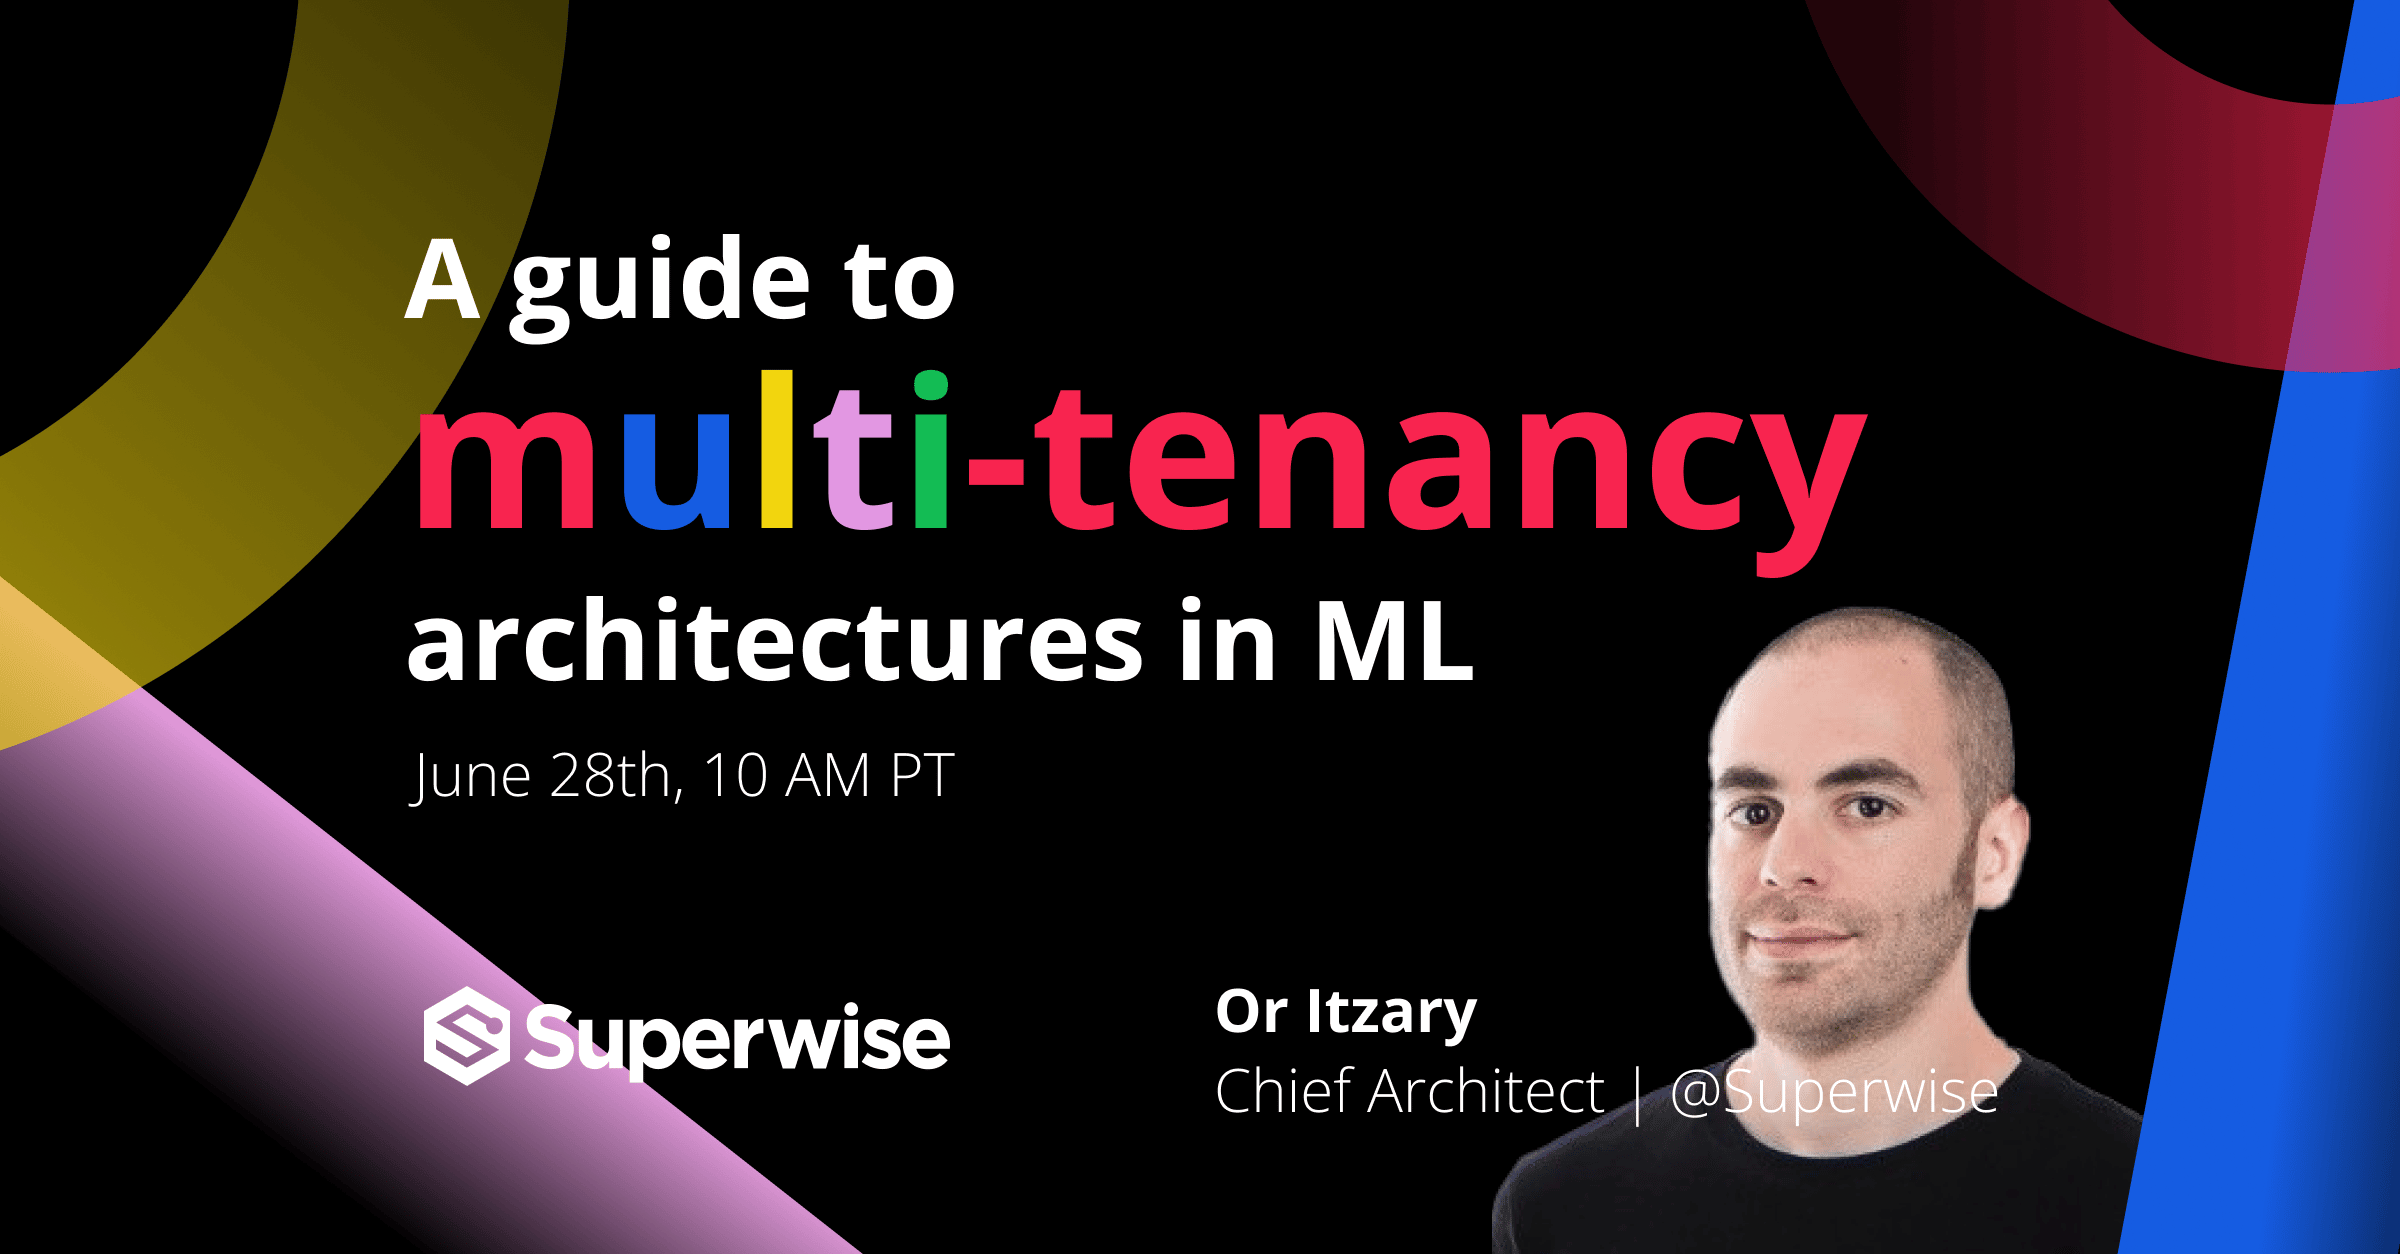 A guide to multi-tenancy